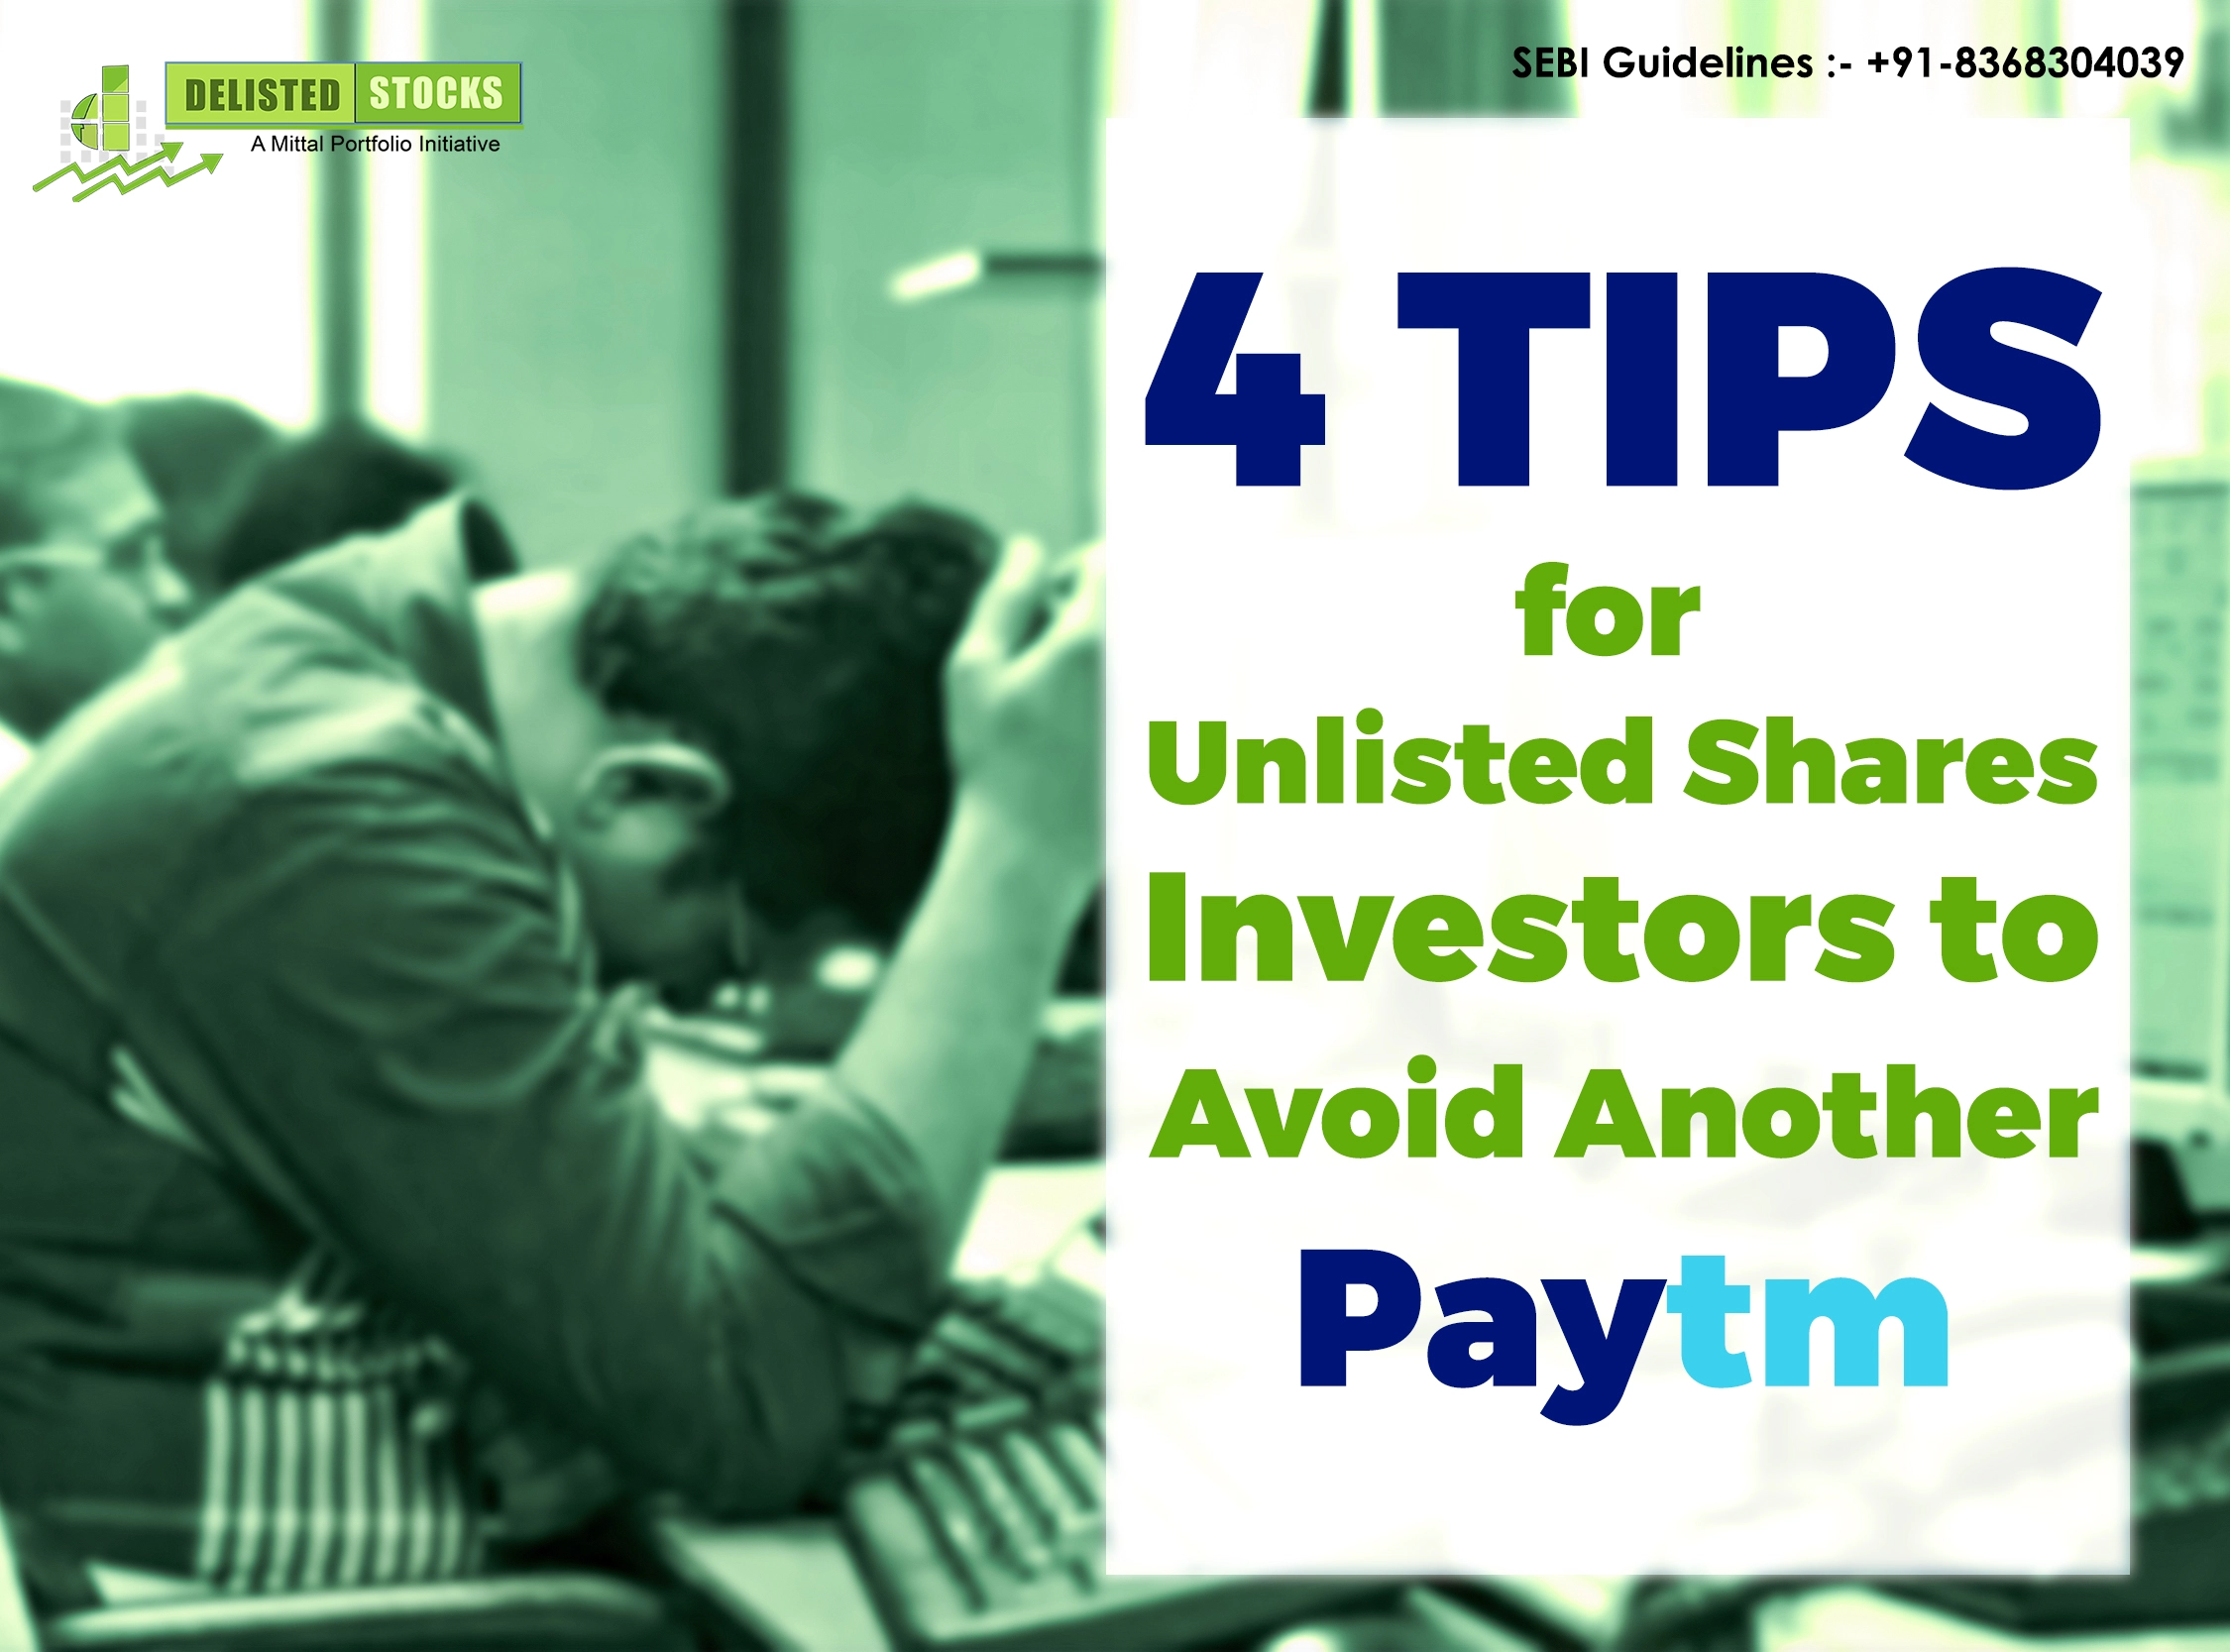 BANNER ...4 Tips for Unlisted Shares Investors to Avoid Another Paytm 1